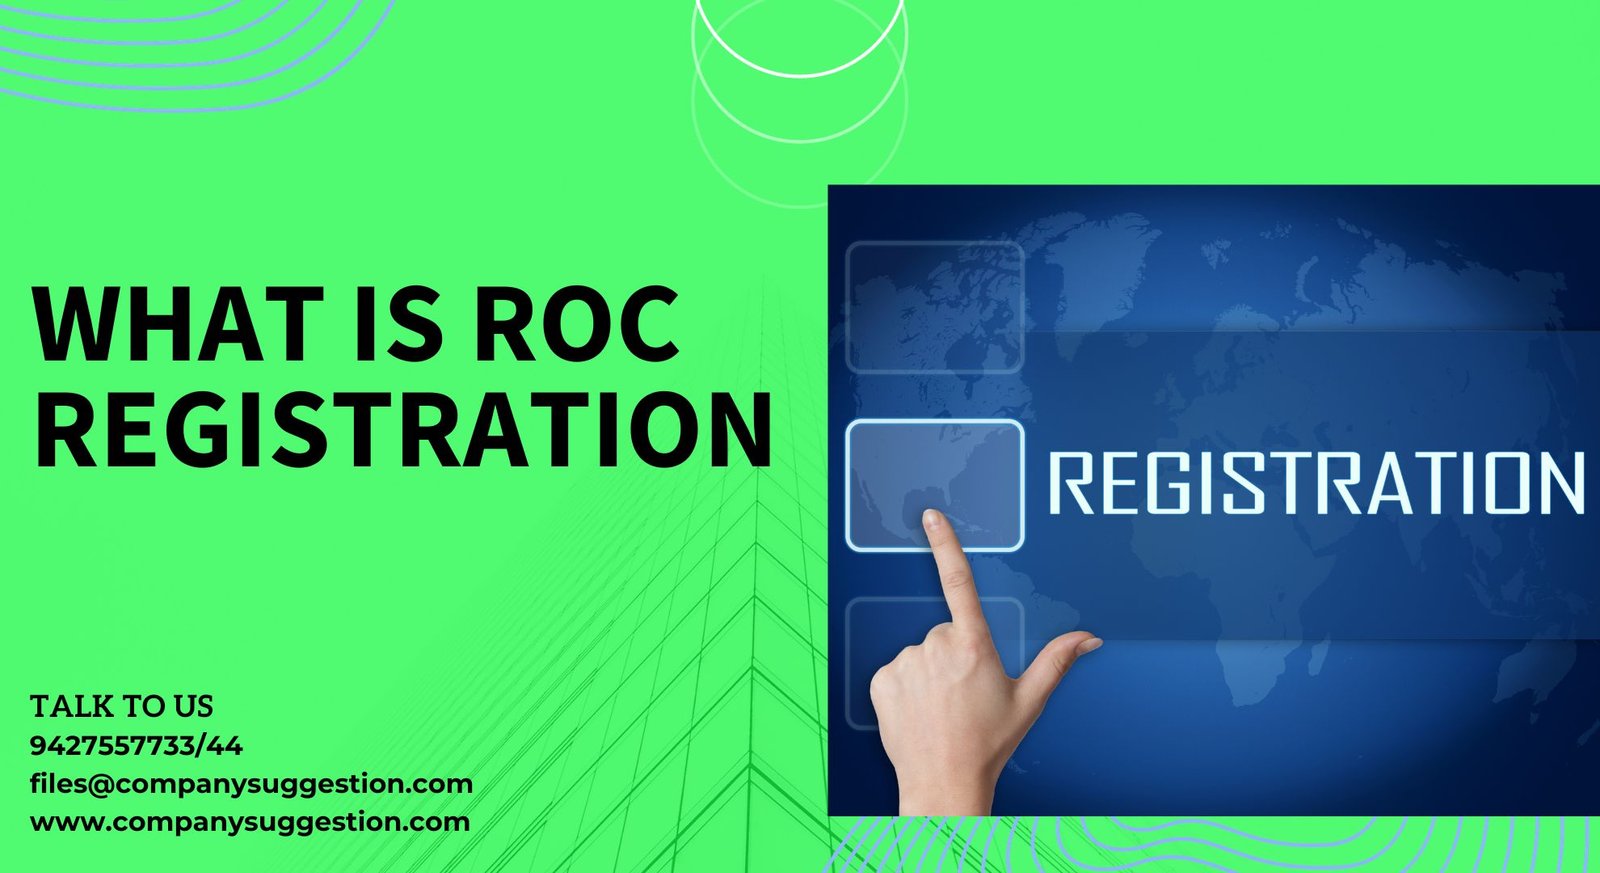 What Is ROC Registration